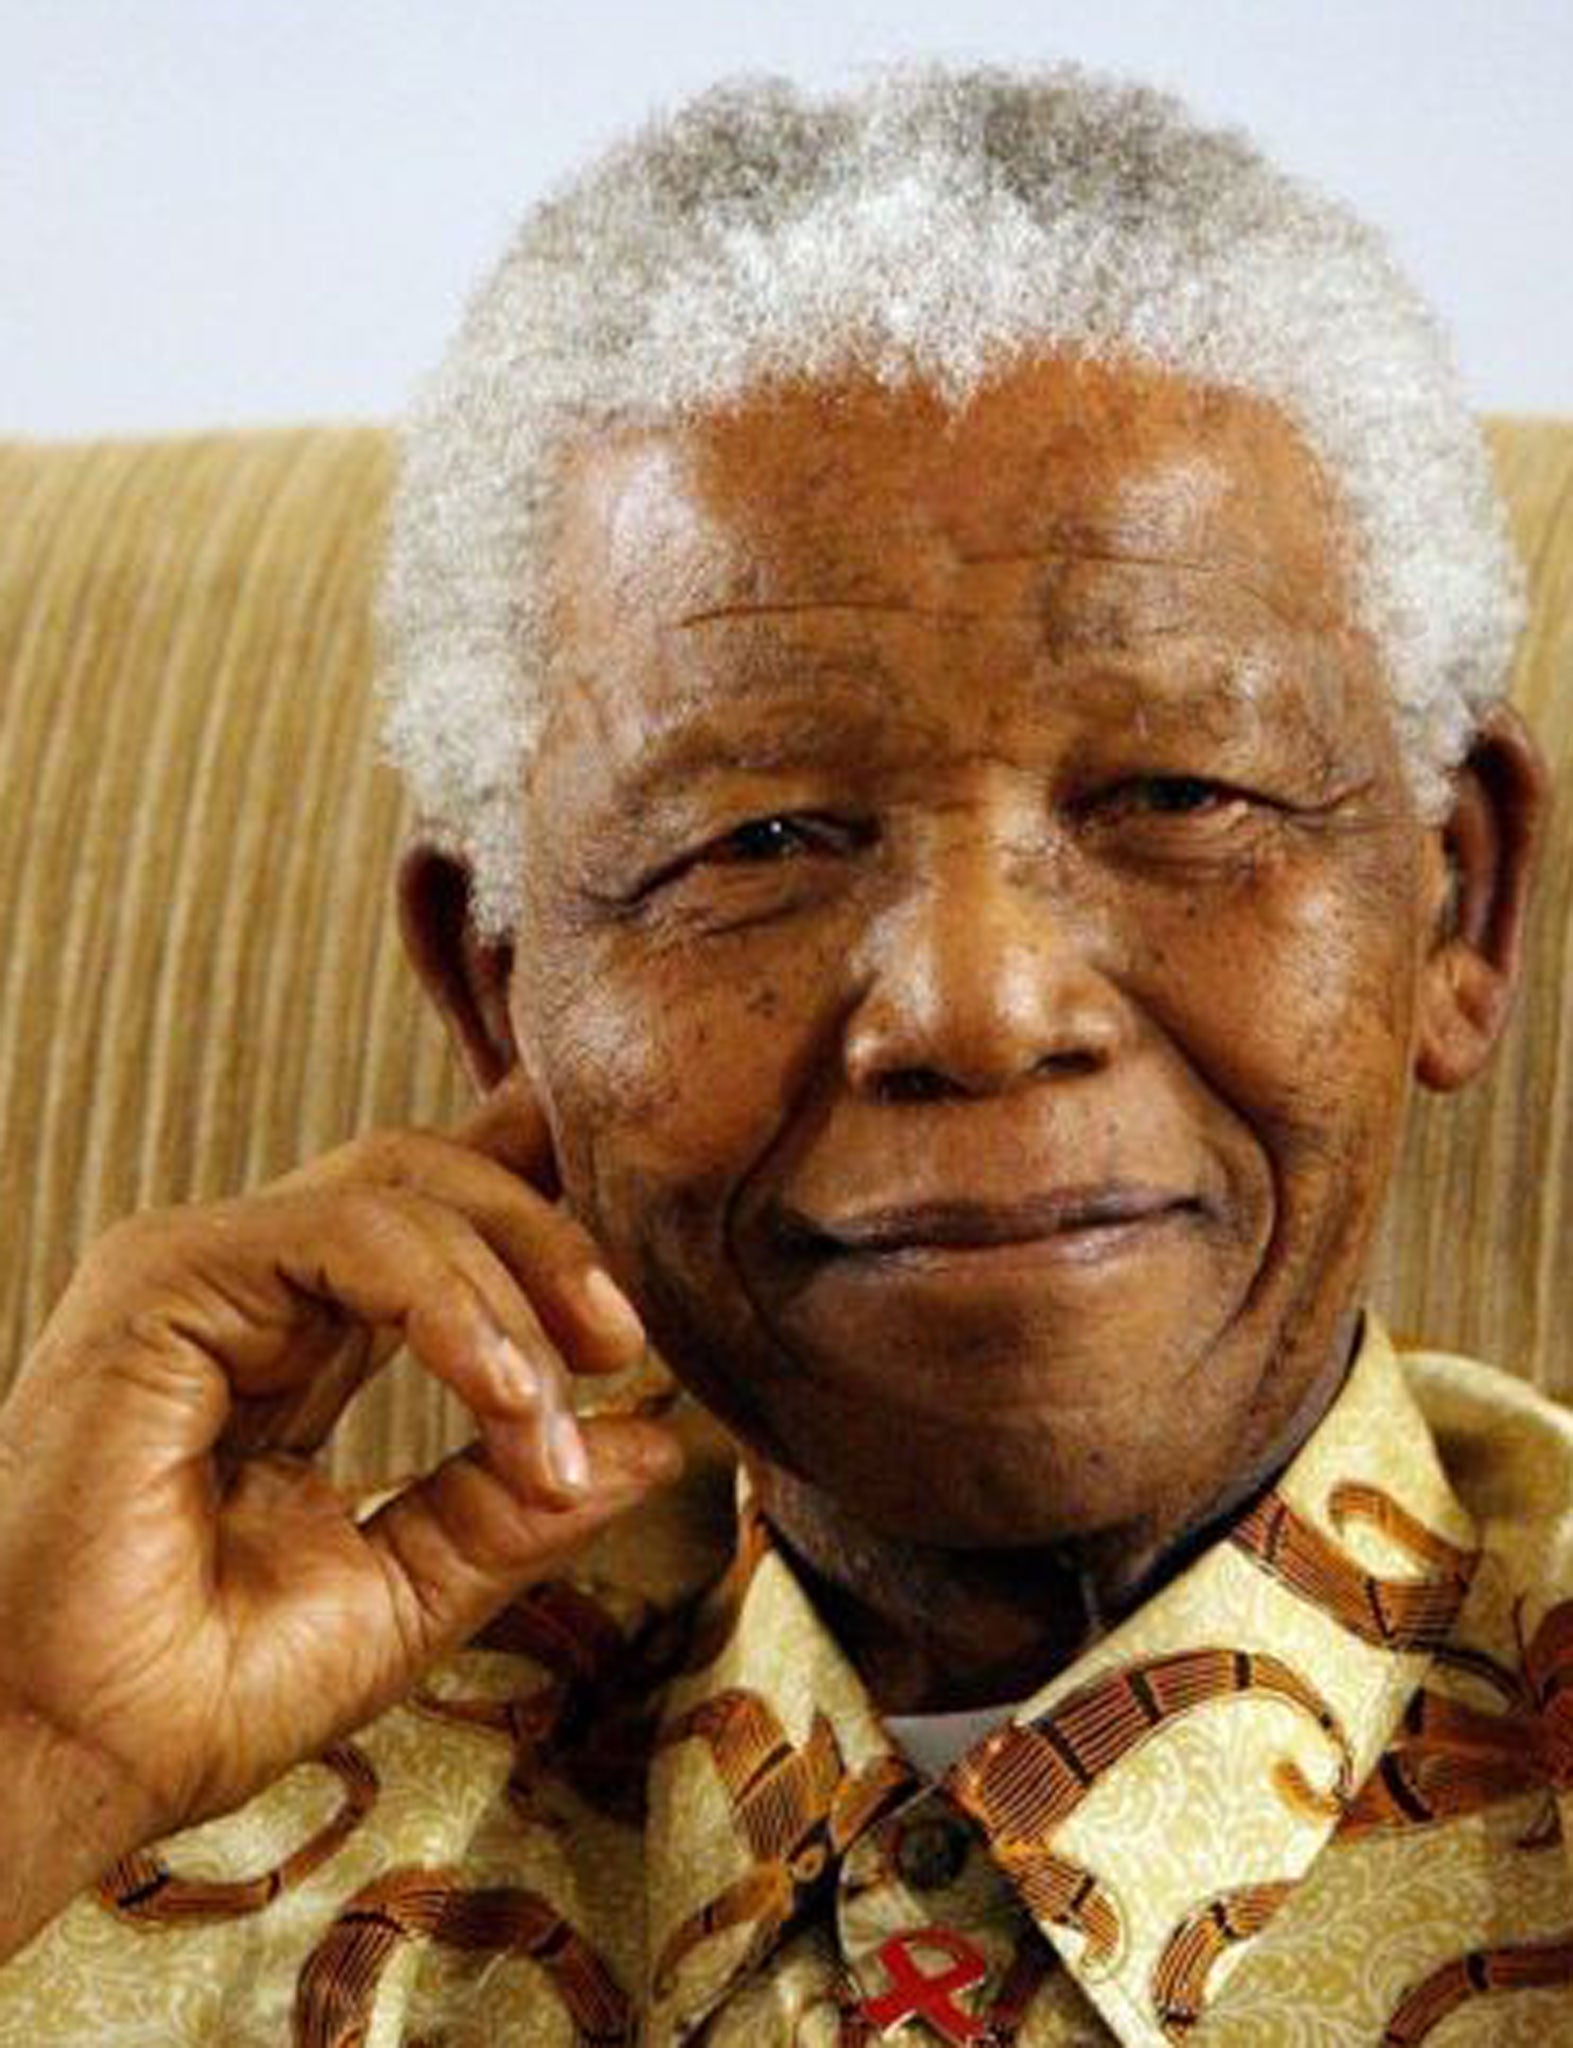 Mandela, 95, has spent two months in a Pretoria hospital battling a lung infection